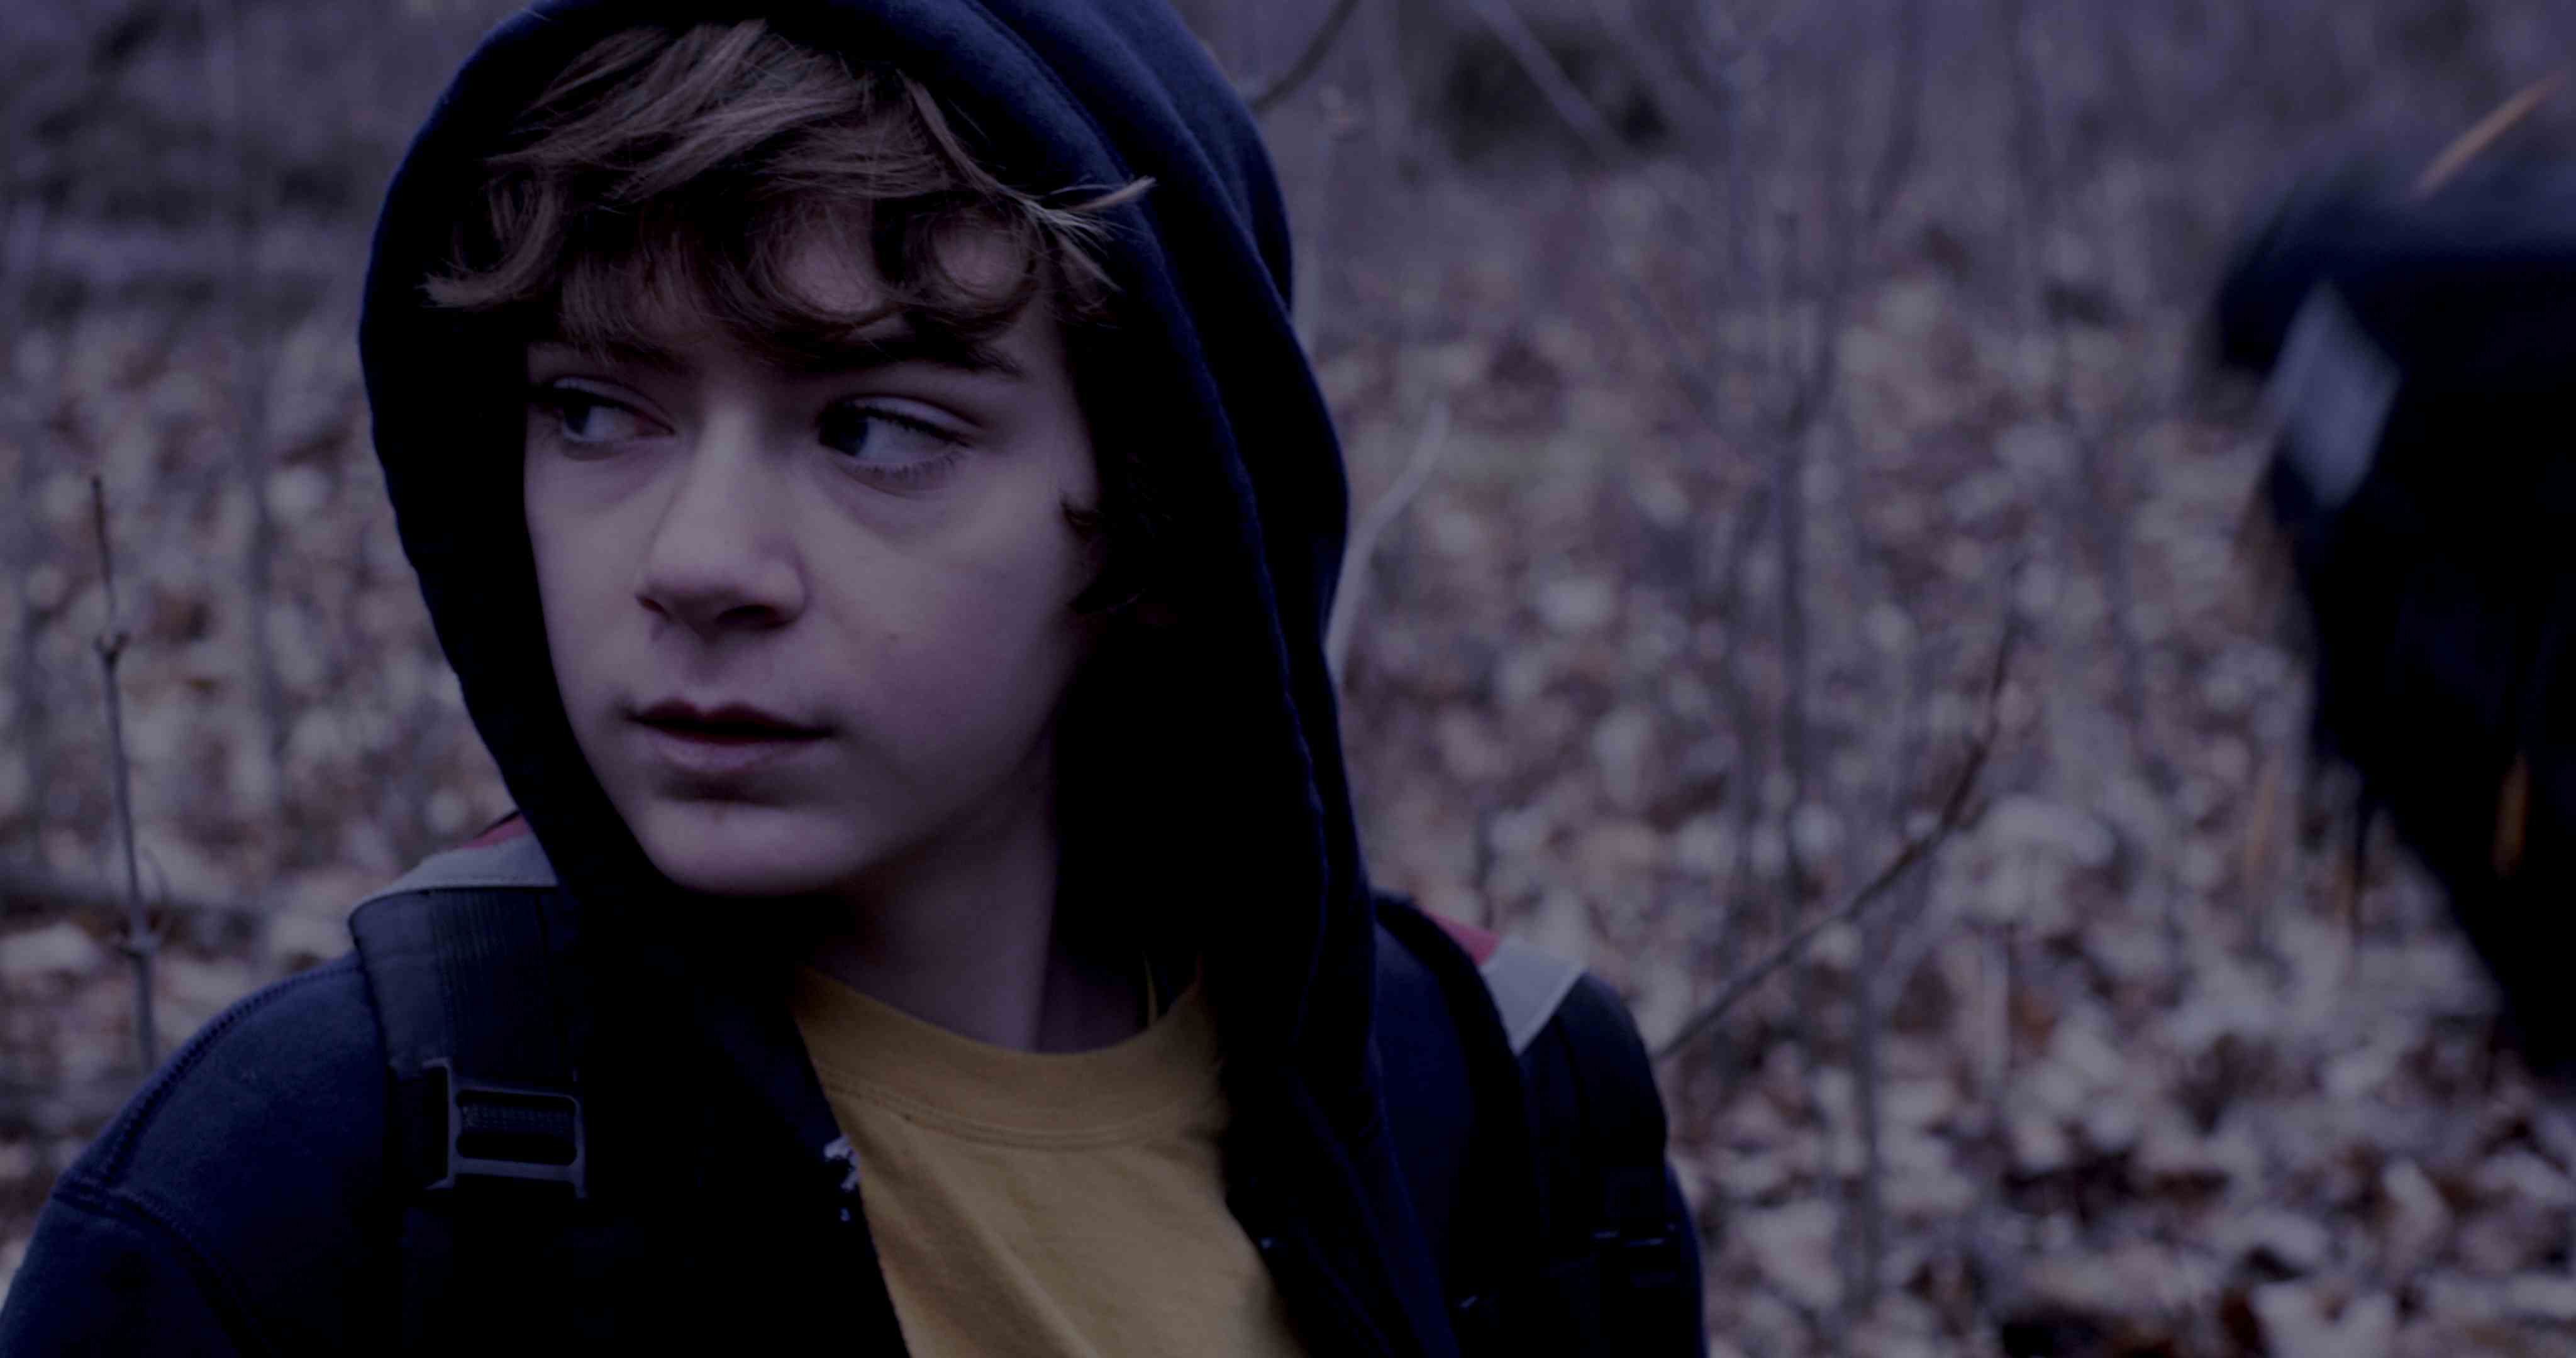 Taylor Denby as Kyle in the short film 'The Parricidal Effect'